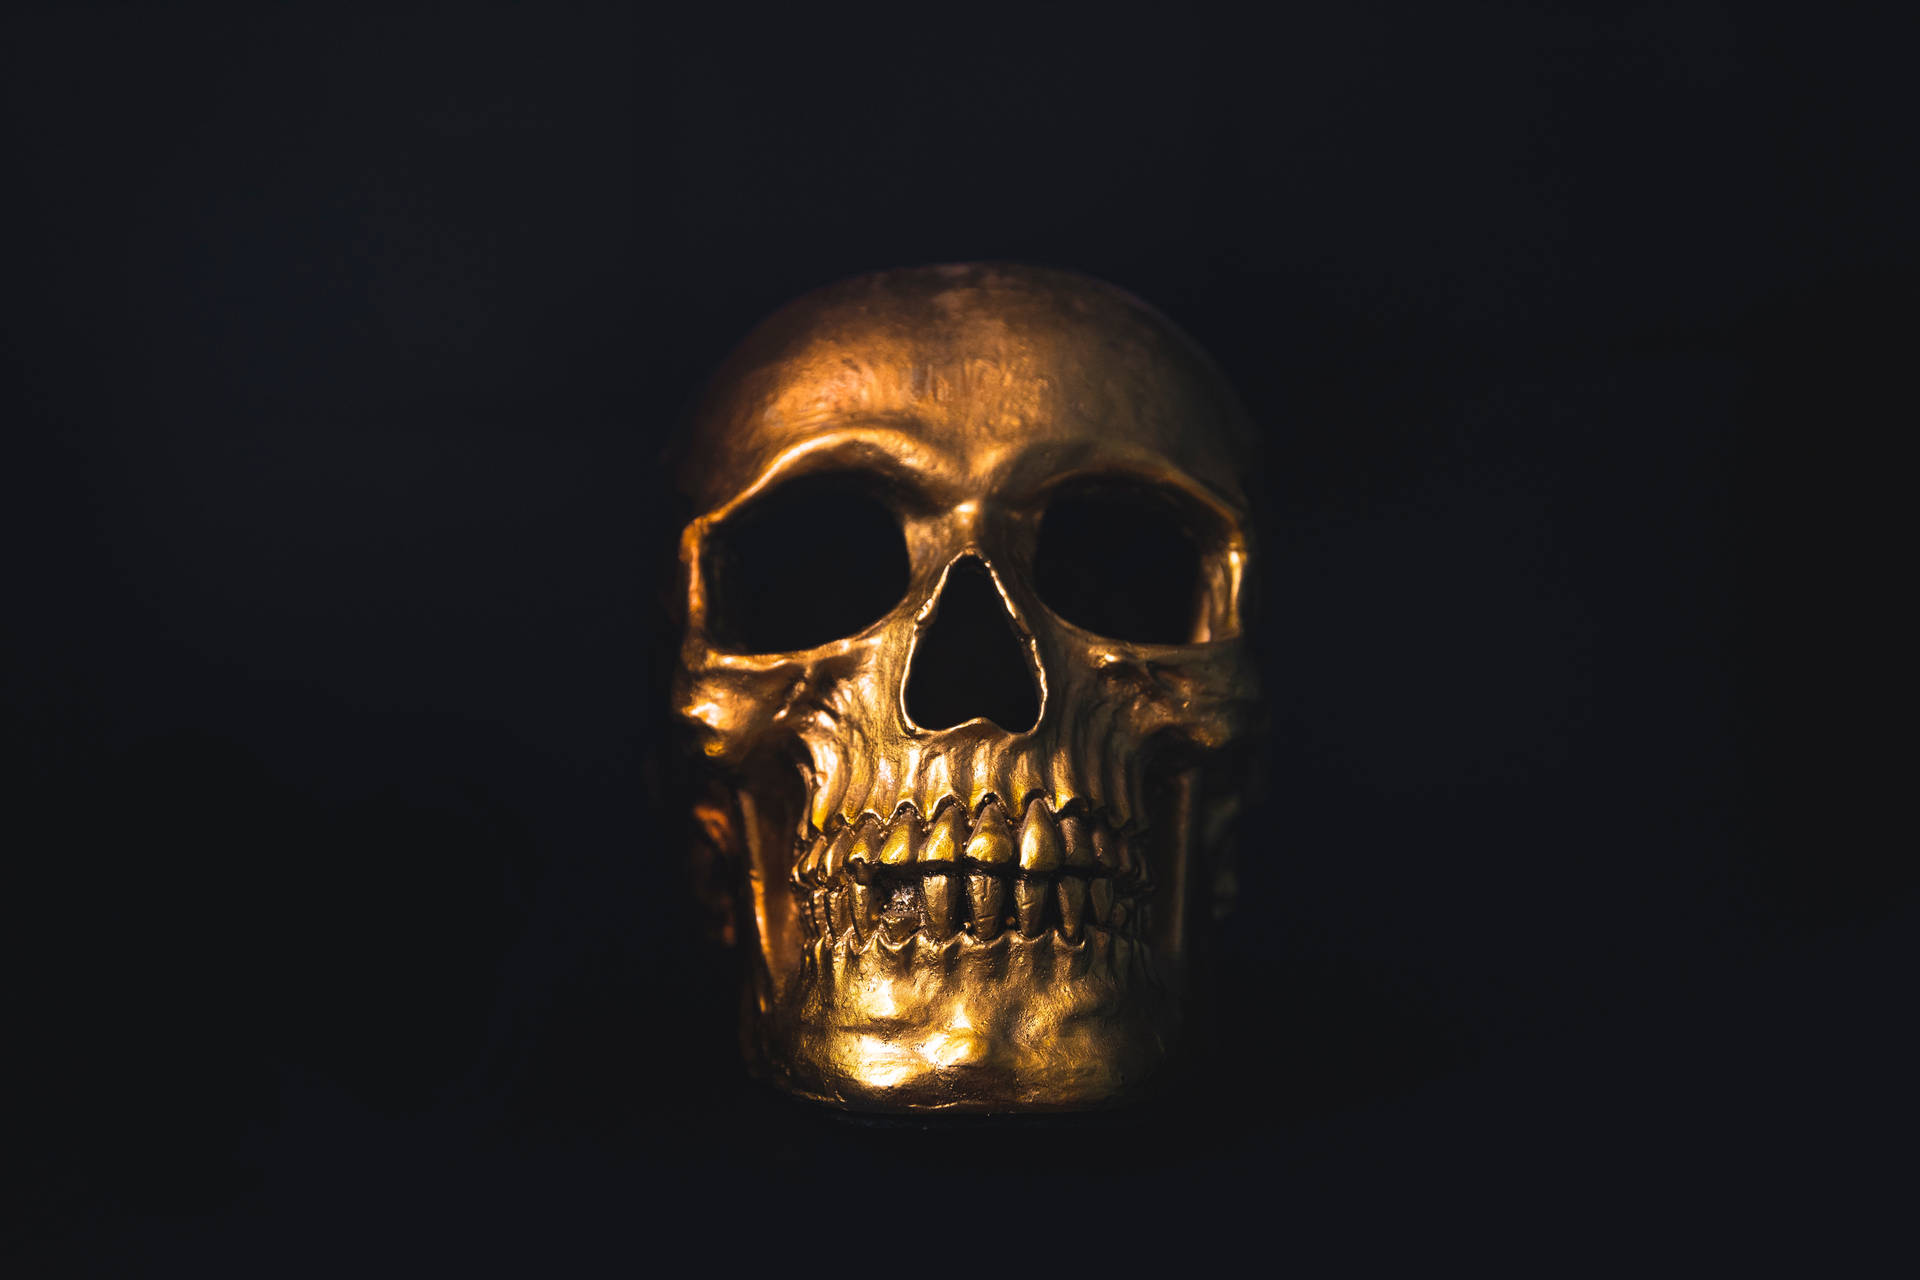 6720X4480 Skull Wallpaper and Background